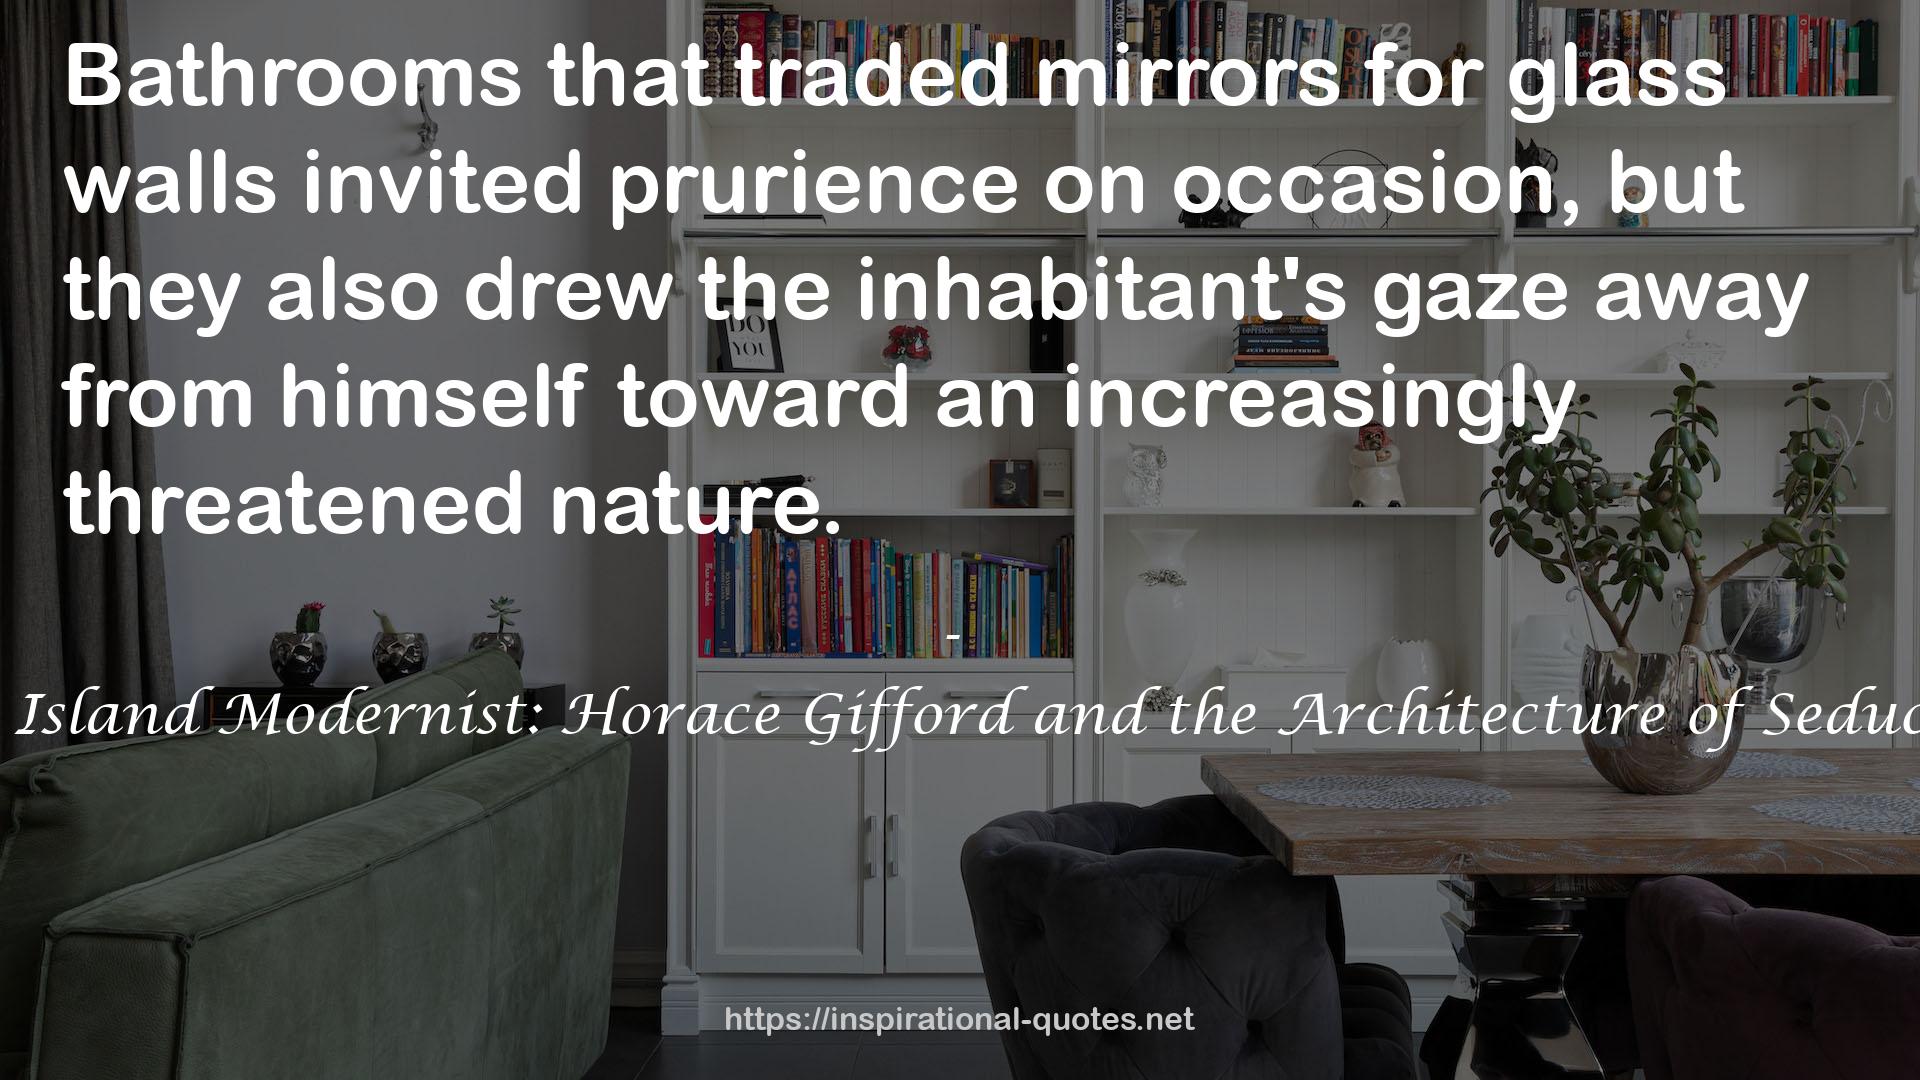 Fire Island Modernist: Horace Gifford and the Architecture of Seduction QUOTES